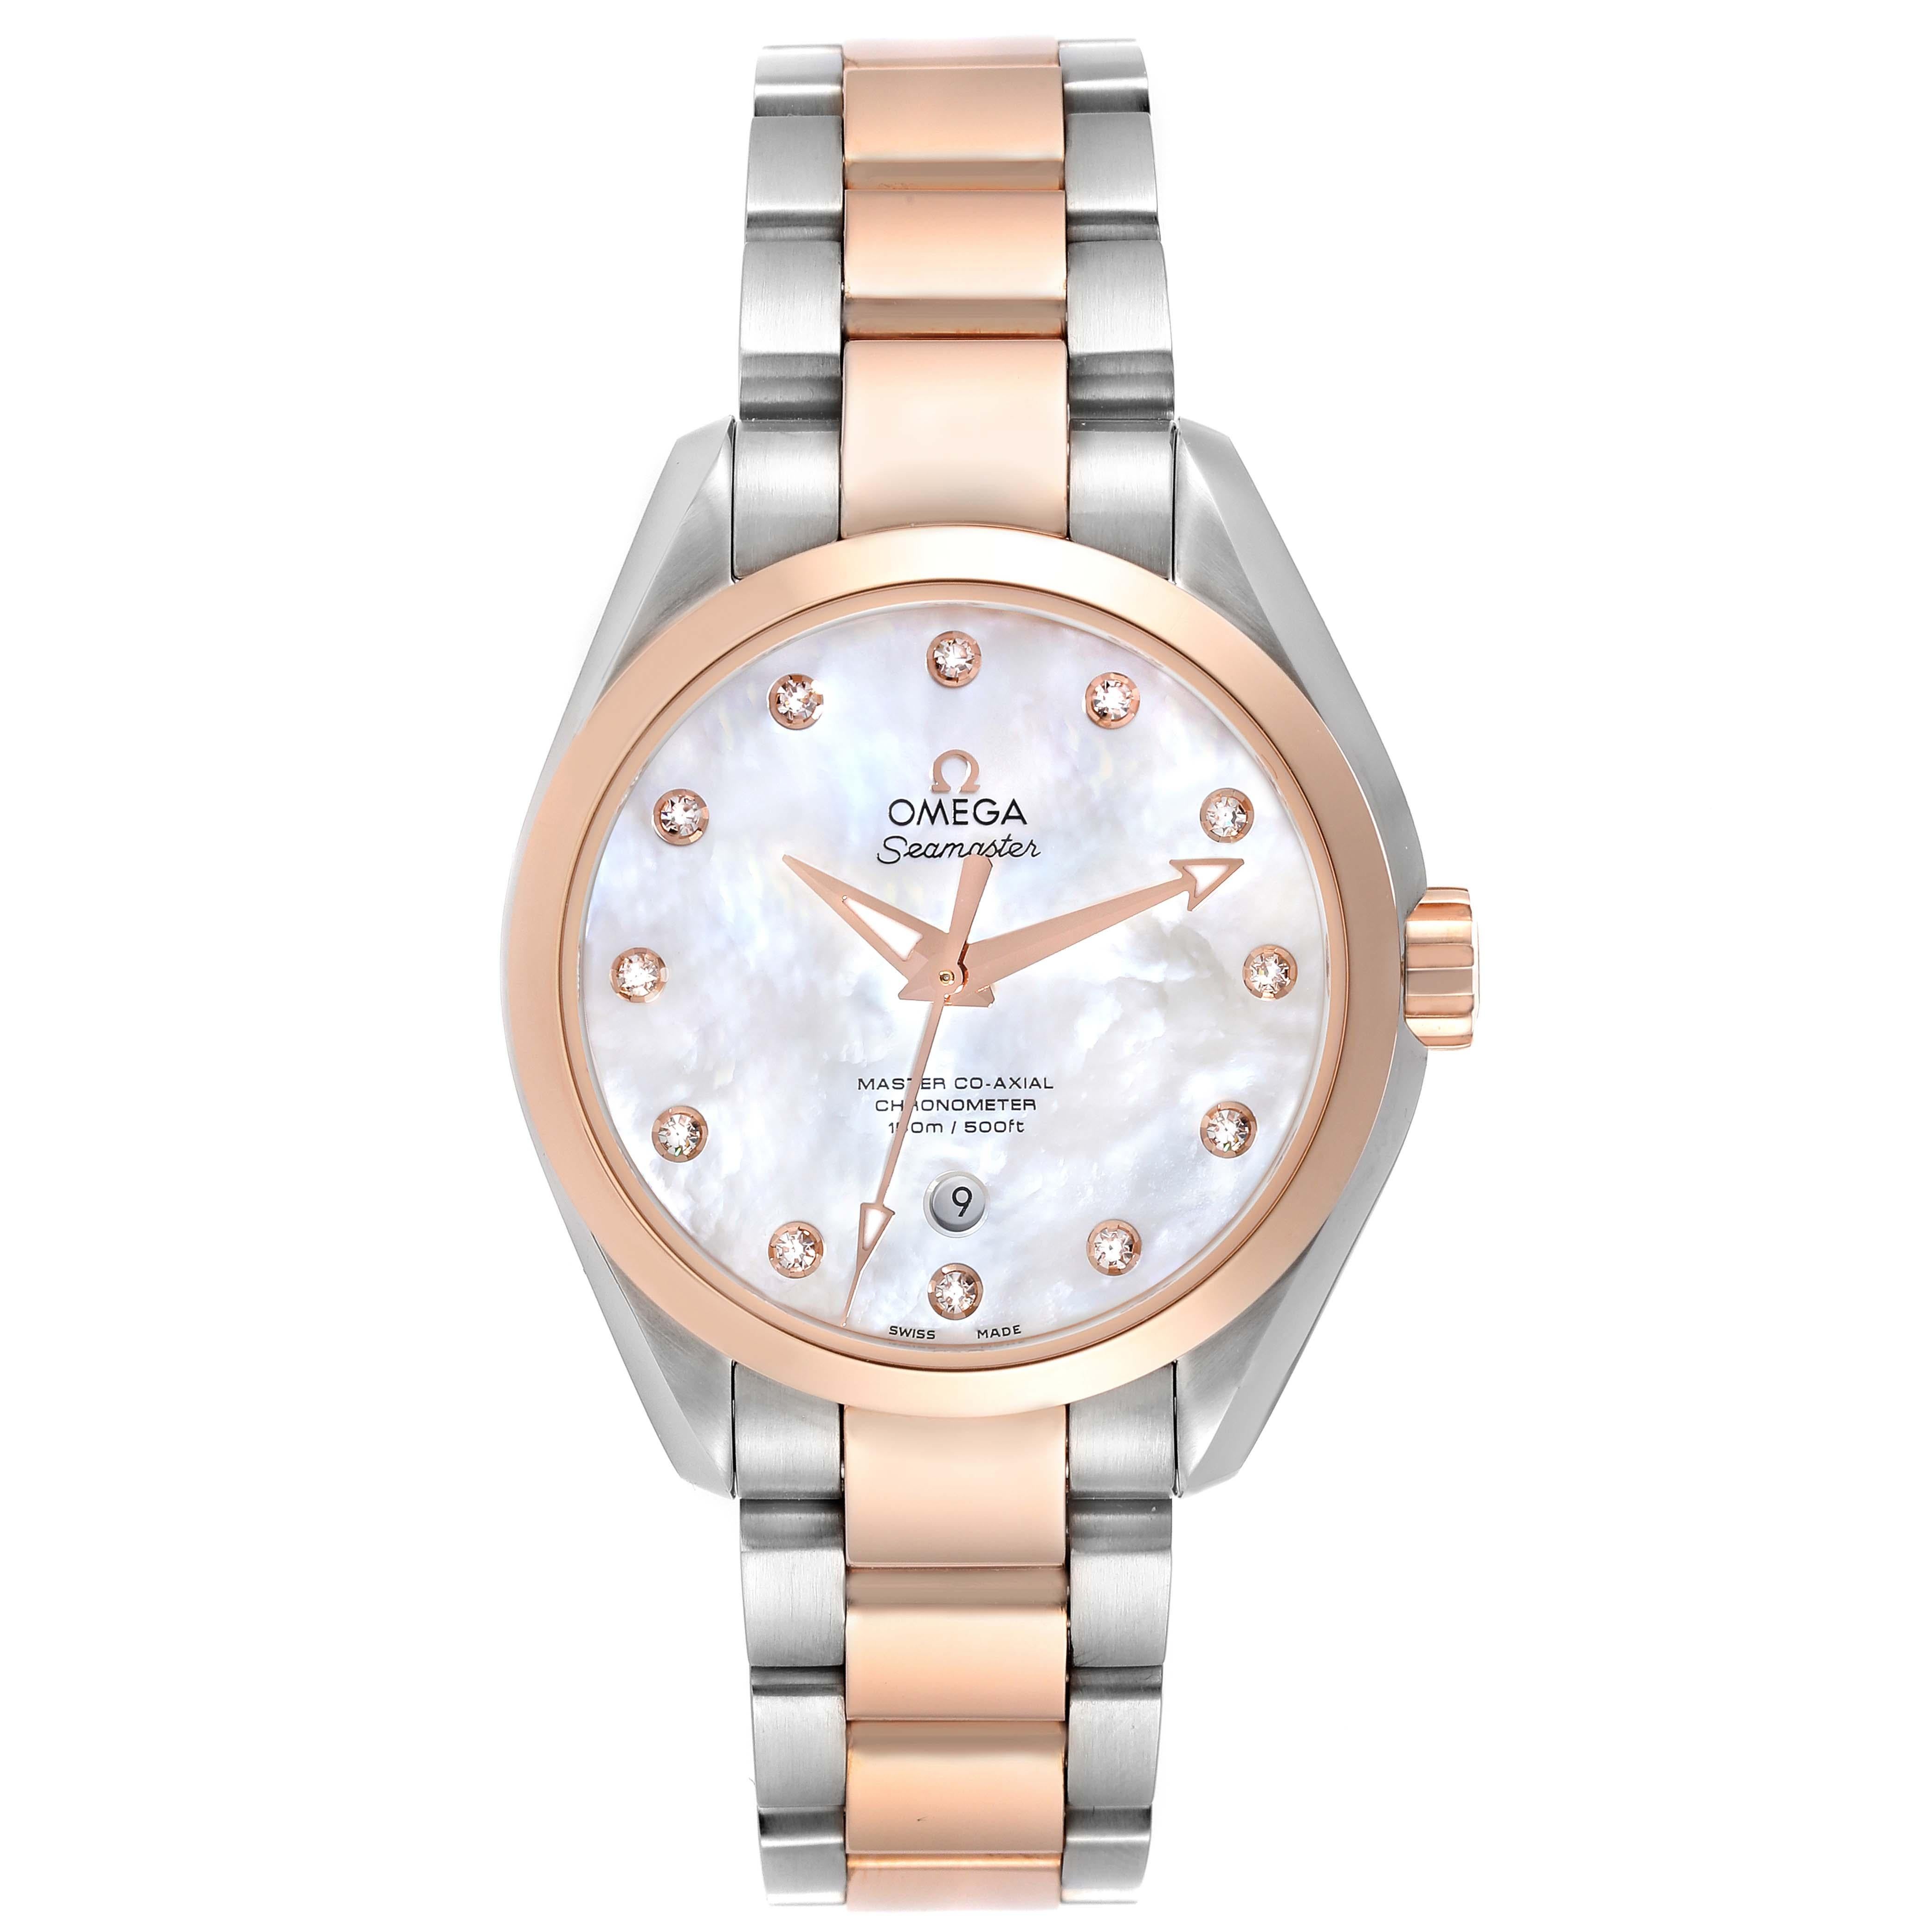 Omega Aqua Terra Rose Gold MOP Diamond Ladies Watch 231.20.34.20.55.001 Unworn. Automatic self-winding movement. Stainless steel and rose gold round case 34 mm in diameter. Exhibition transparent sapphire crystal case back. Omega Sedna rose gold